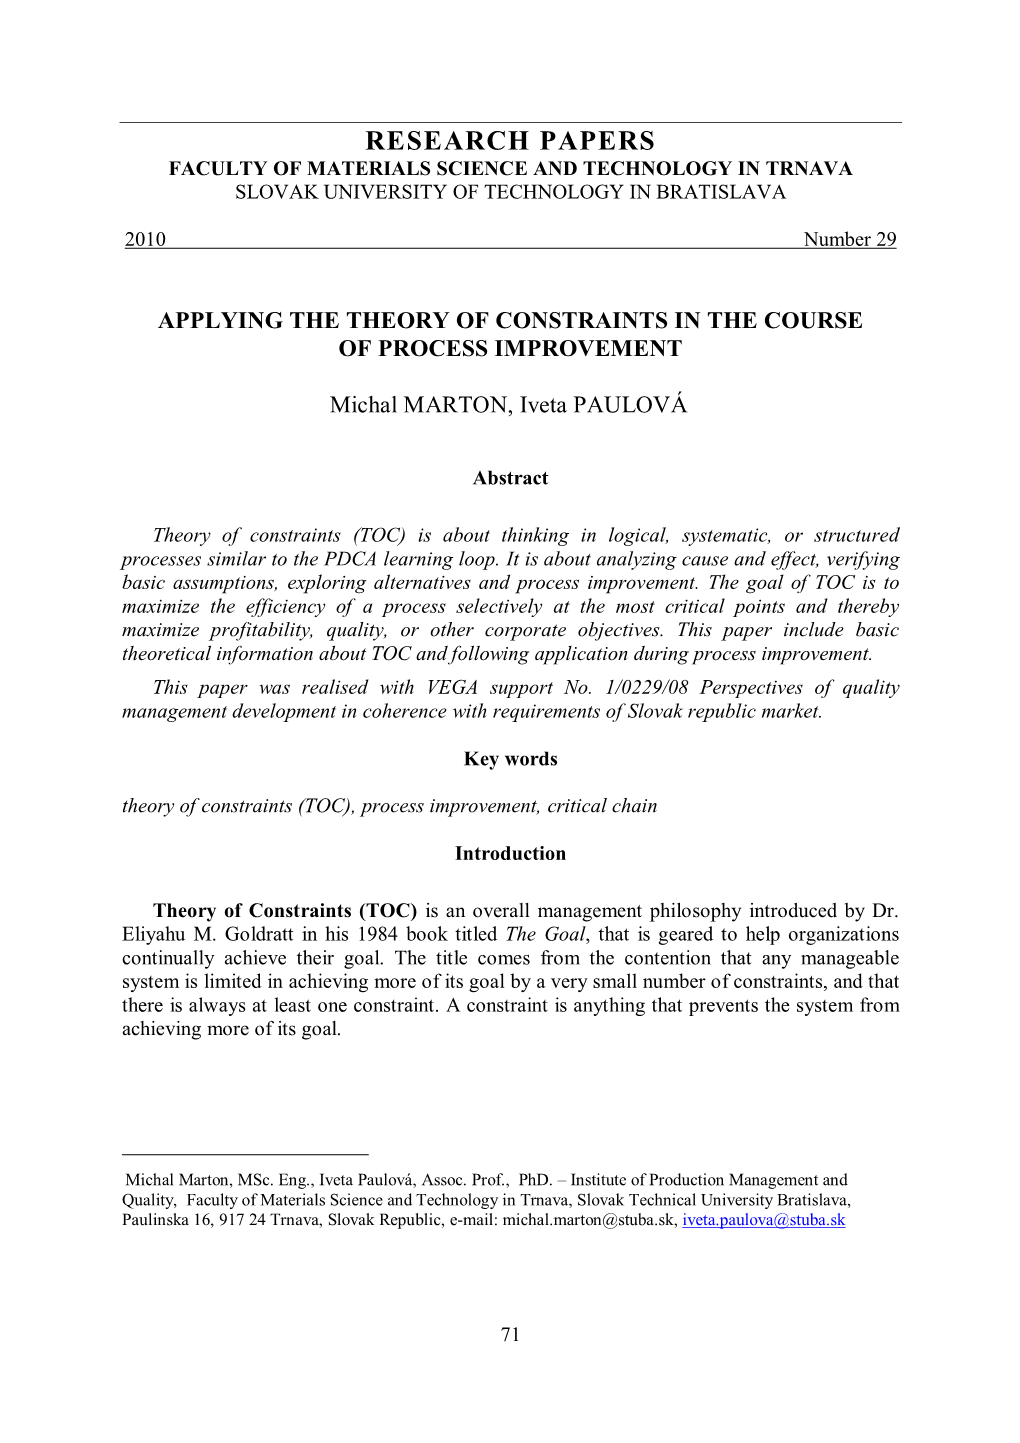 Research Papers Faculty of Materials Science and Technology in Trnava Slovak University of Technology in Bratislava